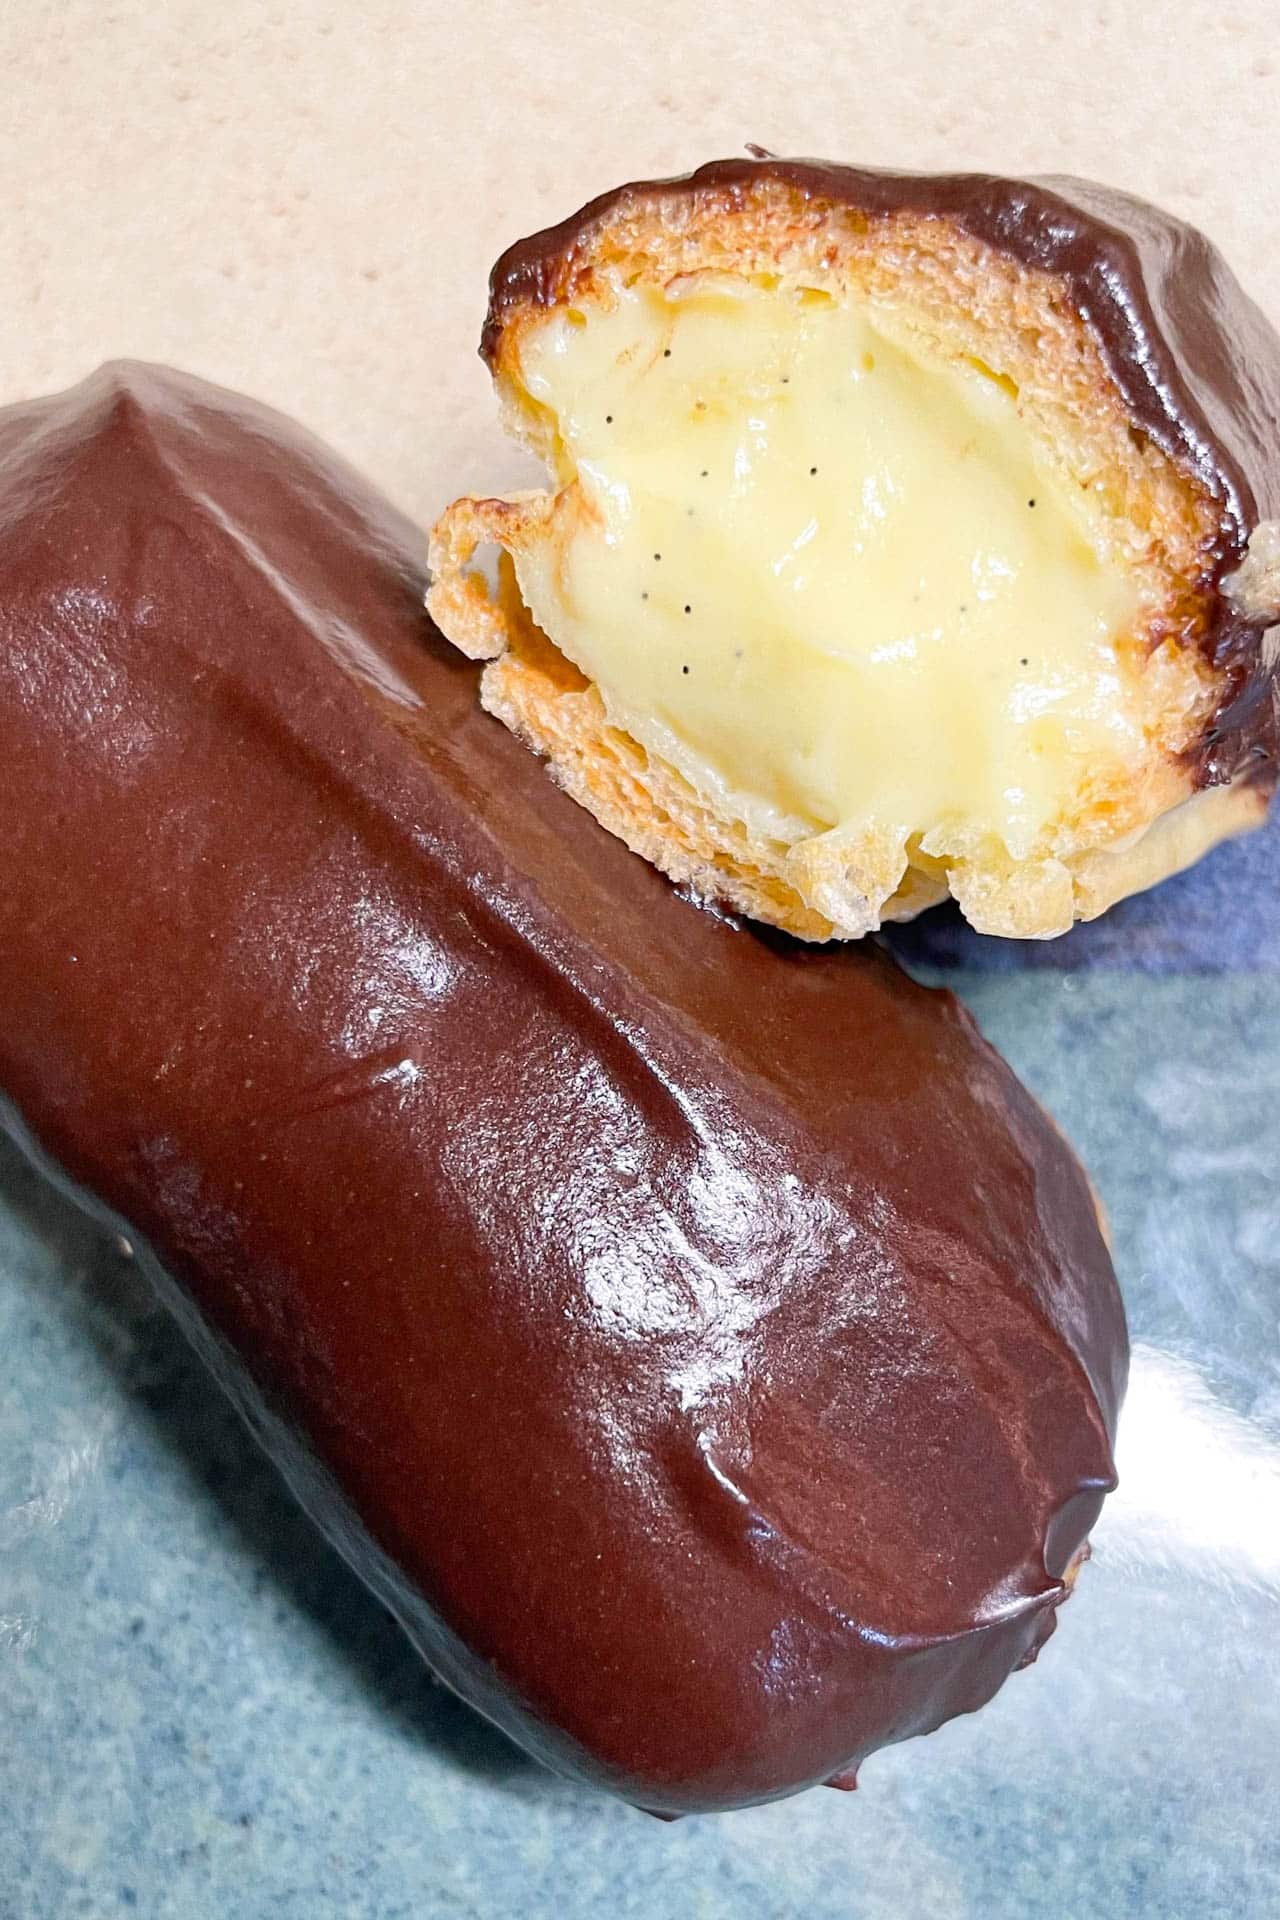 The inside of a finished eclair.